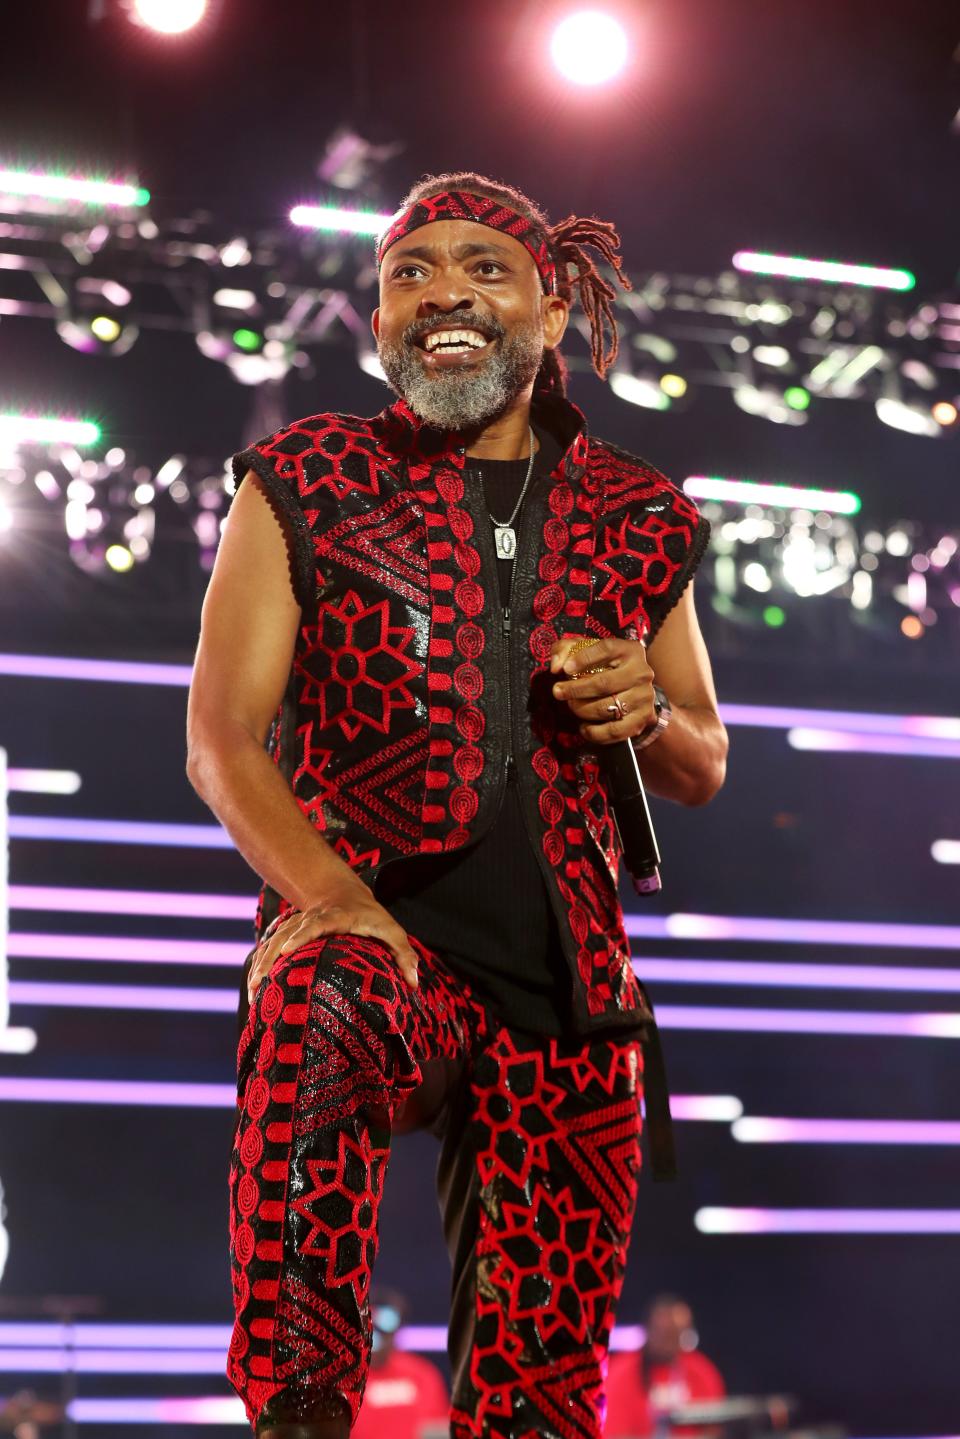 Machel Montano in a red and black floral set